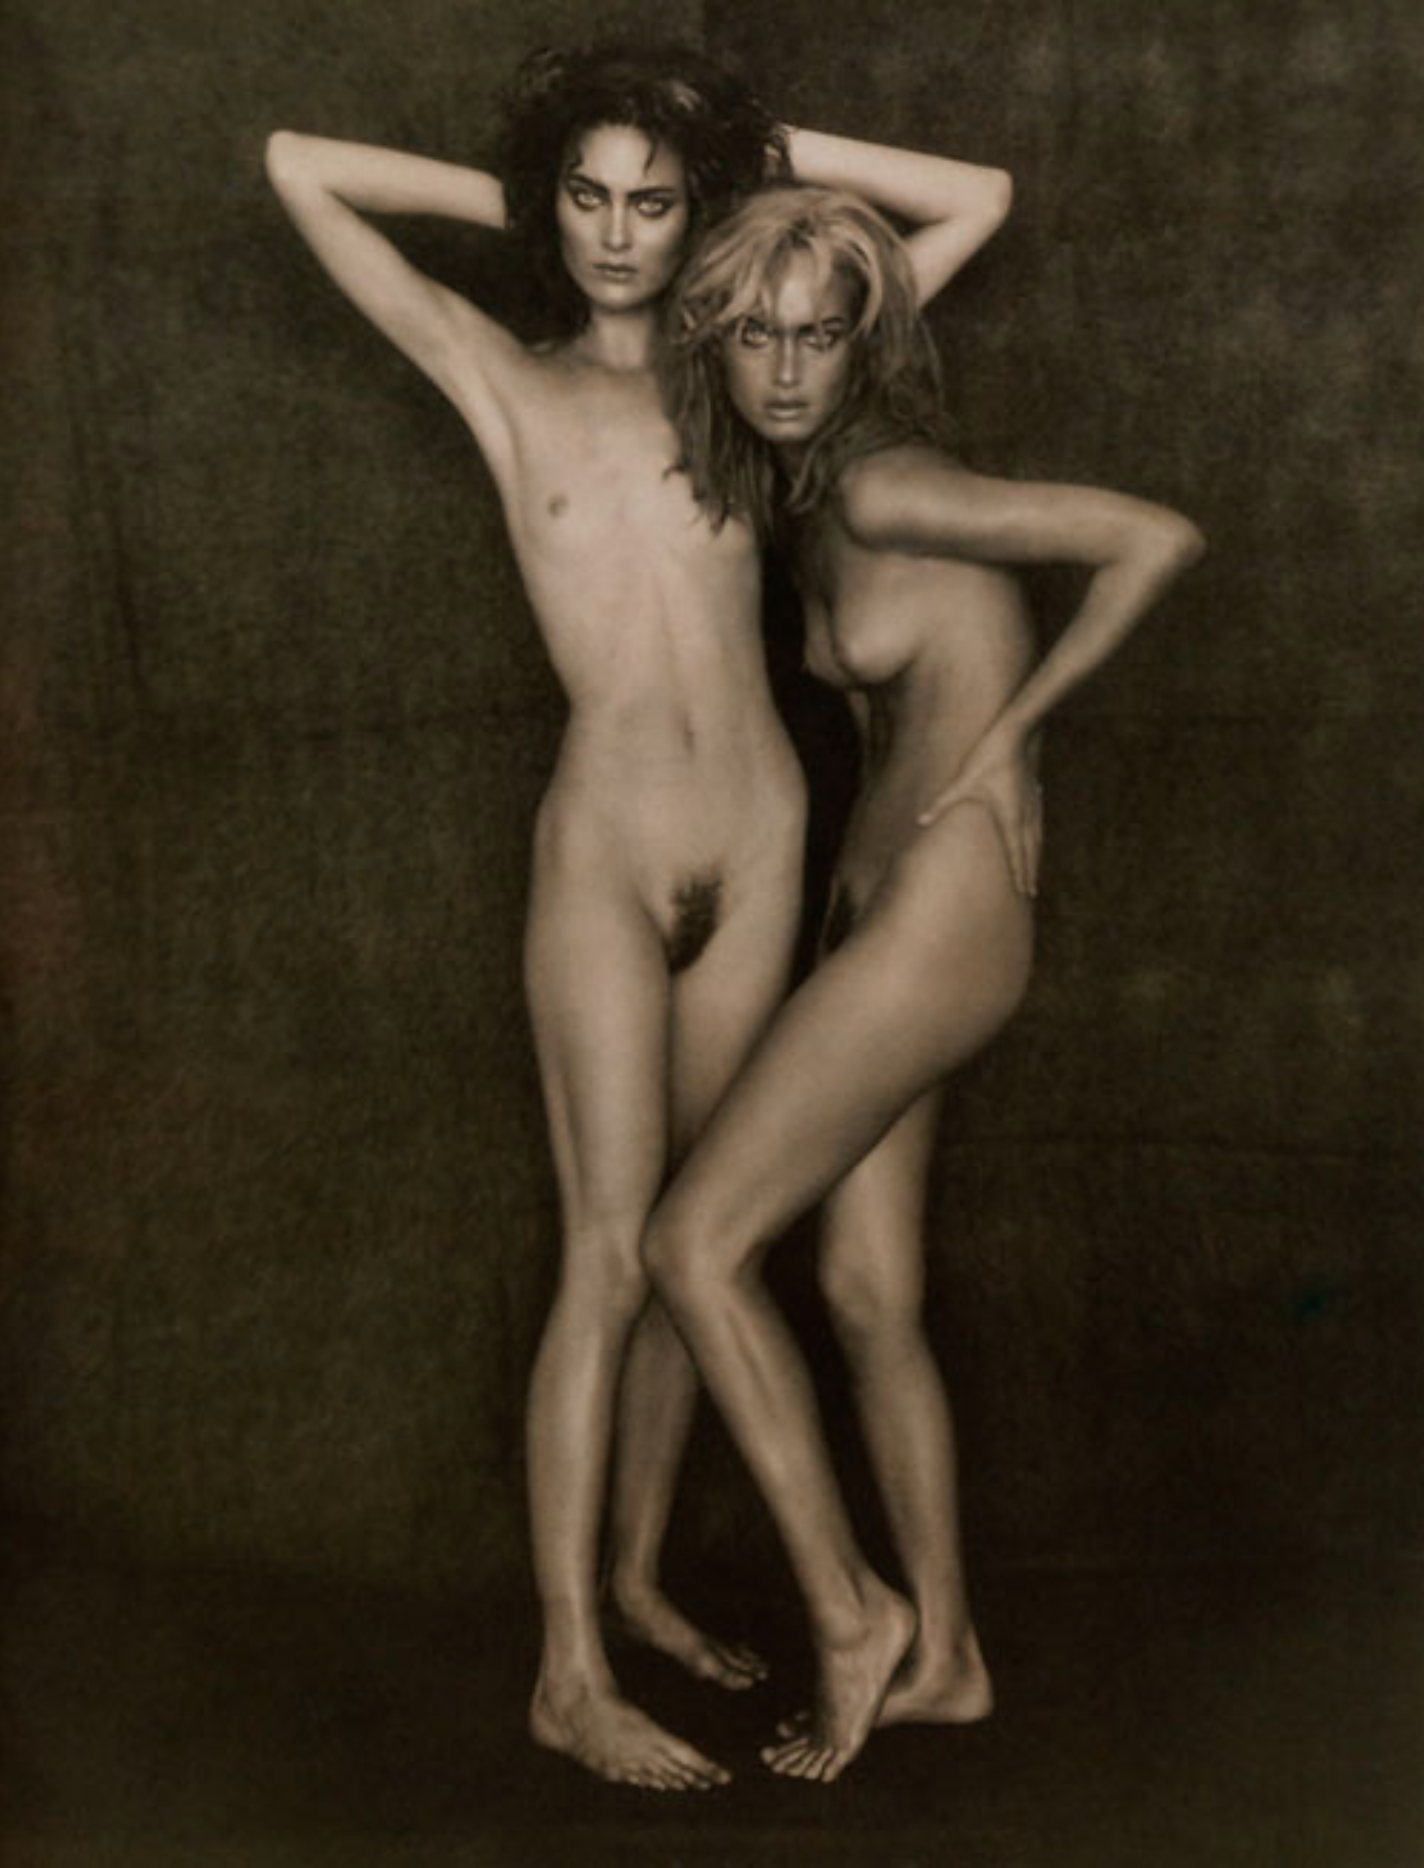 Shalom-Harlow-Amber-Valletta-Vogue-UK-by-Paolo-Roversi-2010-NSFW-00001.png